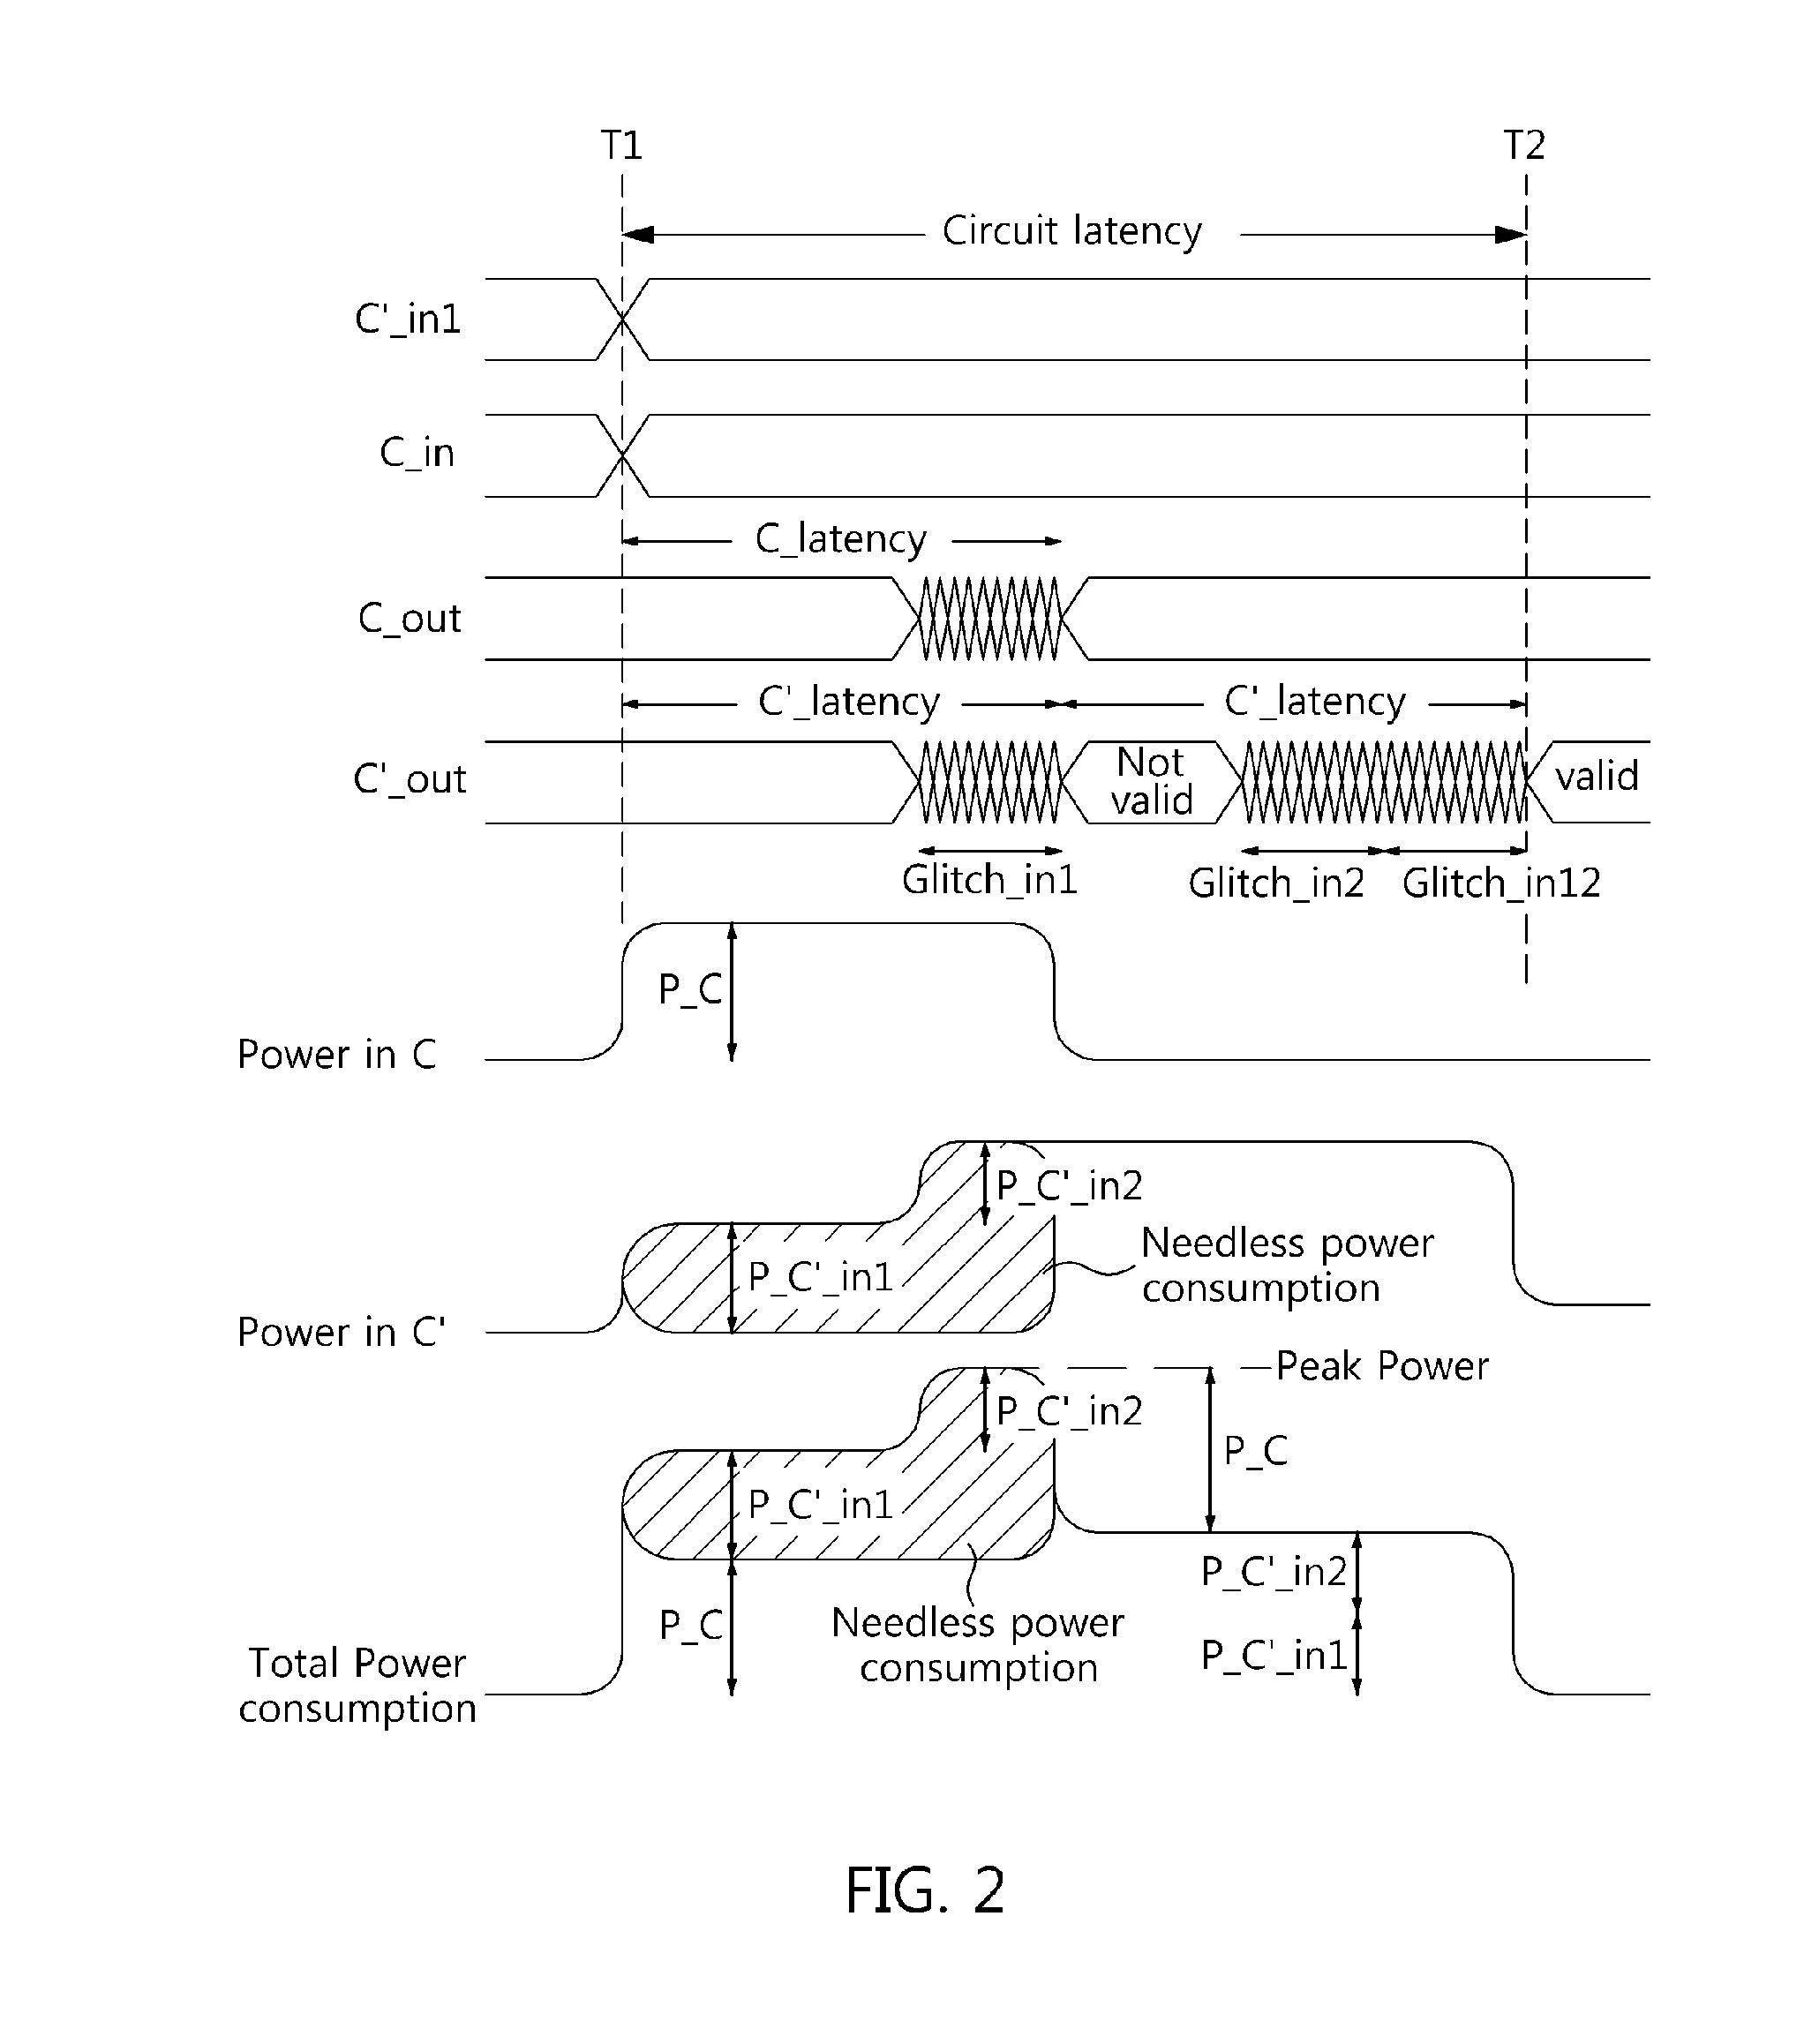 Apparatus and method for reducing peak power using asynchronous circuit design technology